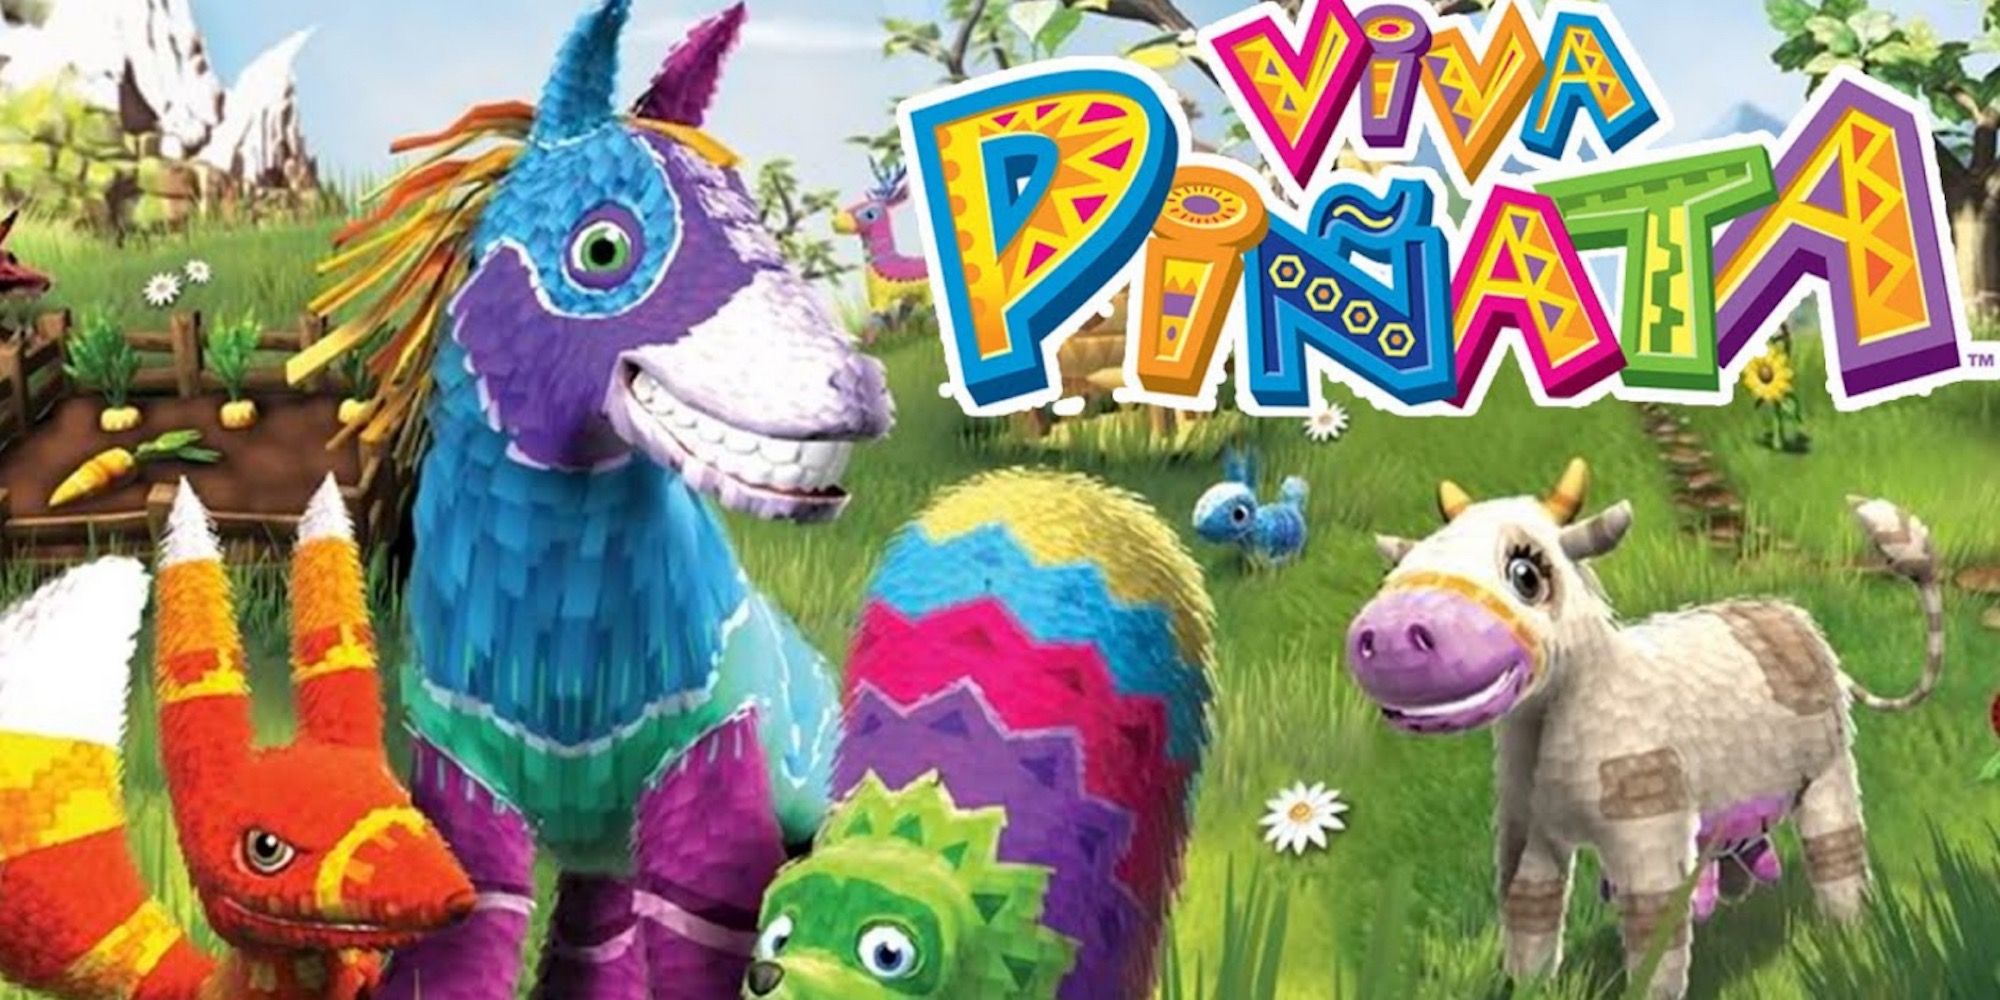 Promo art featuring characters in Viva Pinata